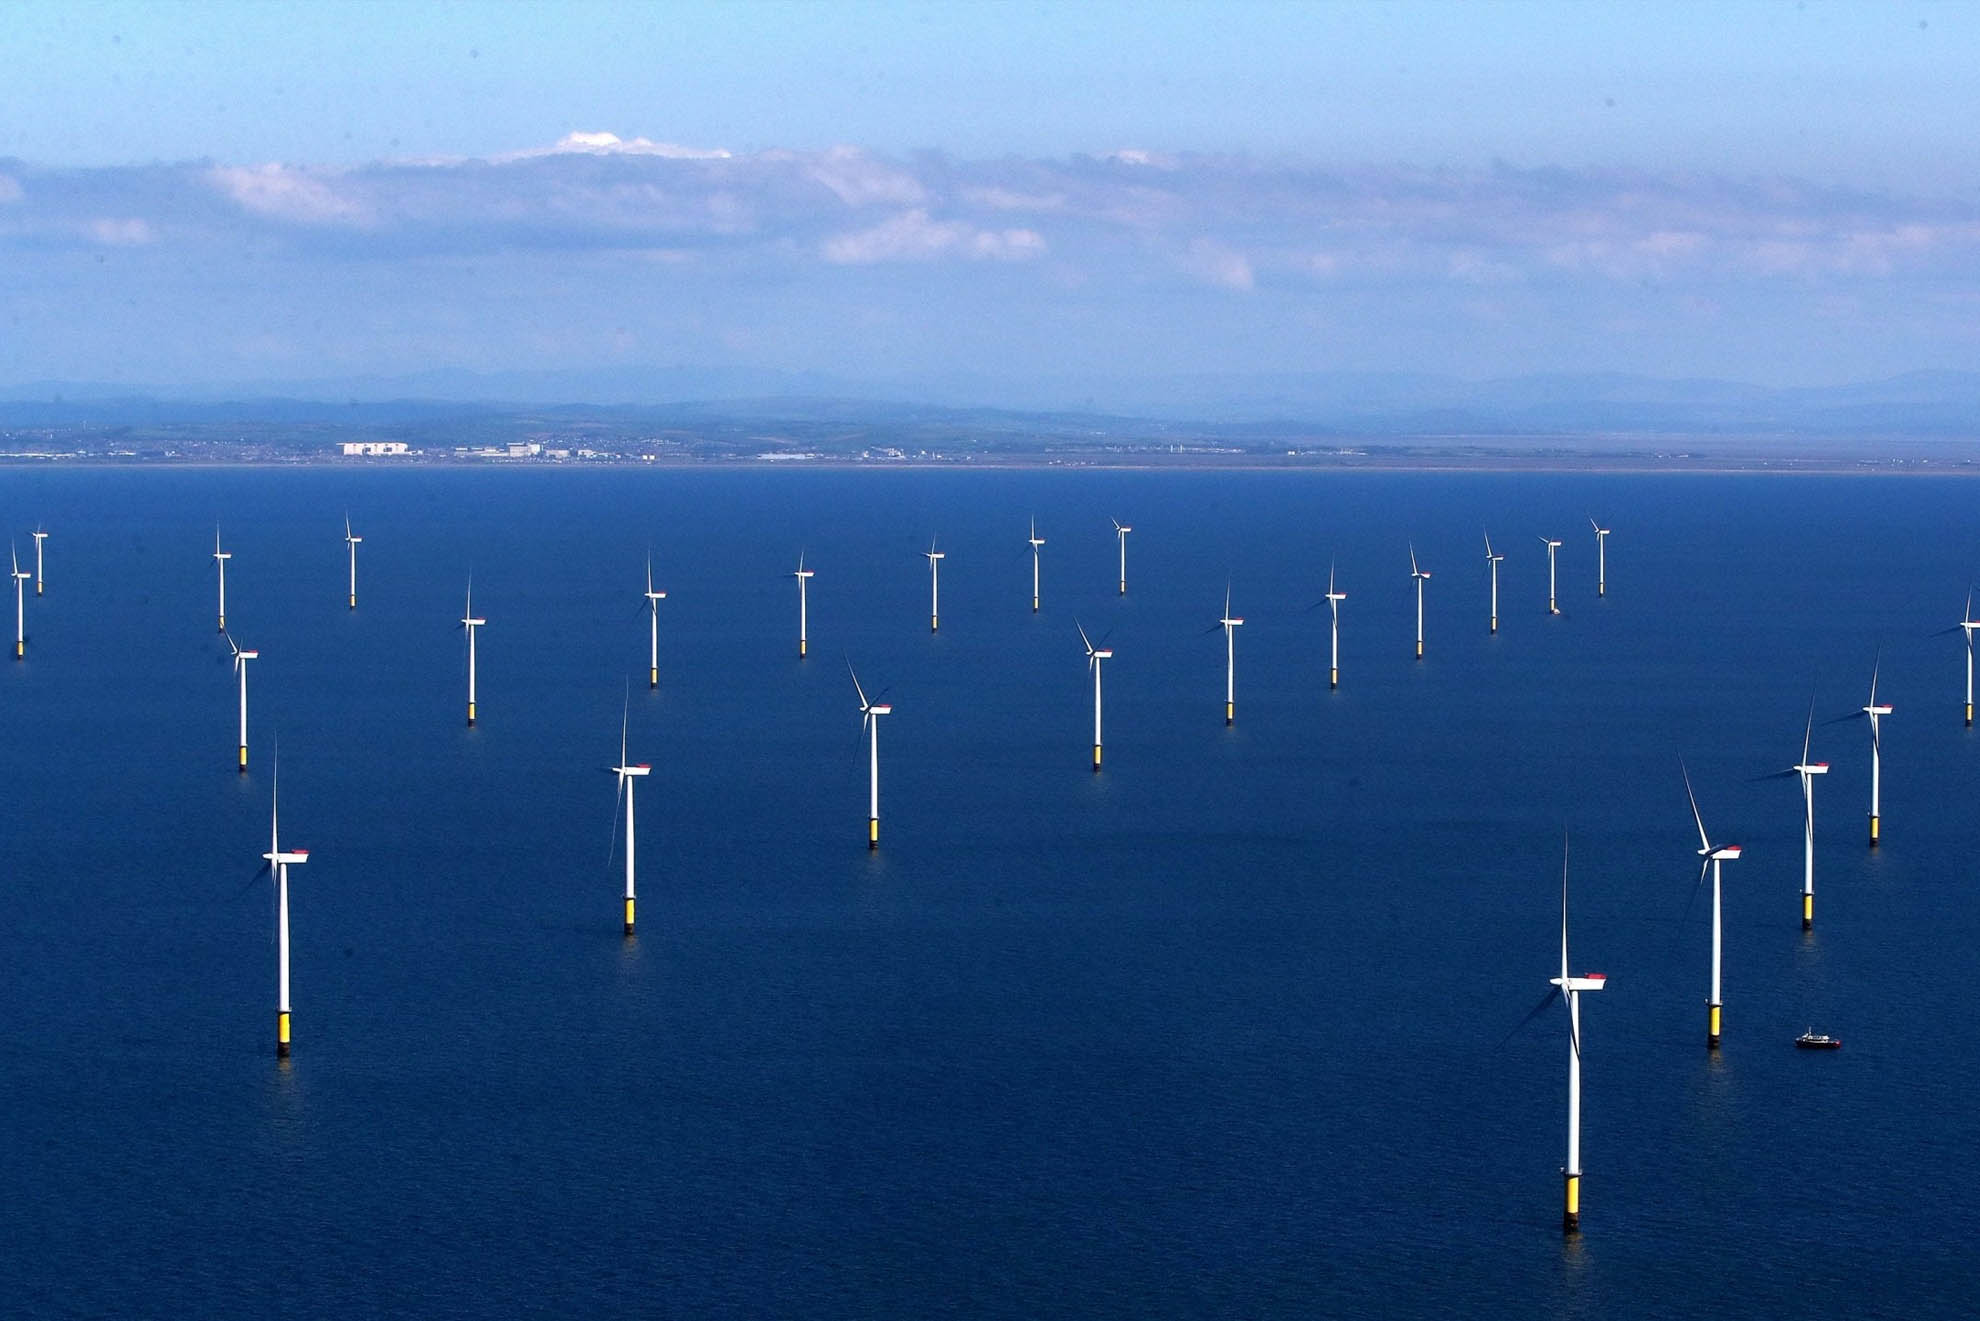 KnowESG_World's largest Wind Farm Construction Begins in UK